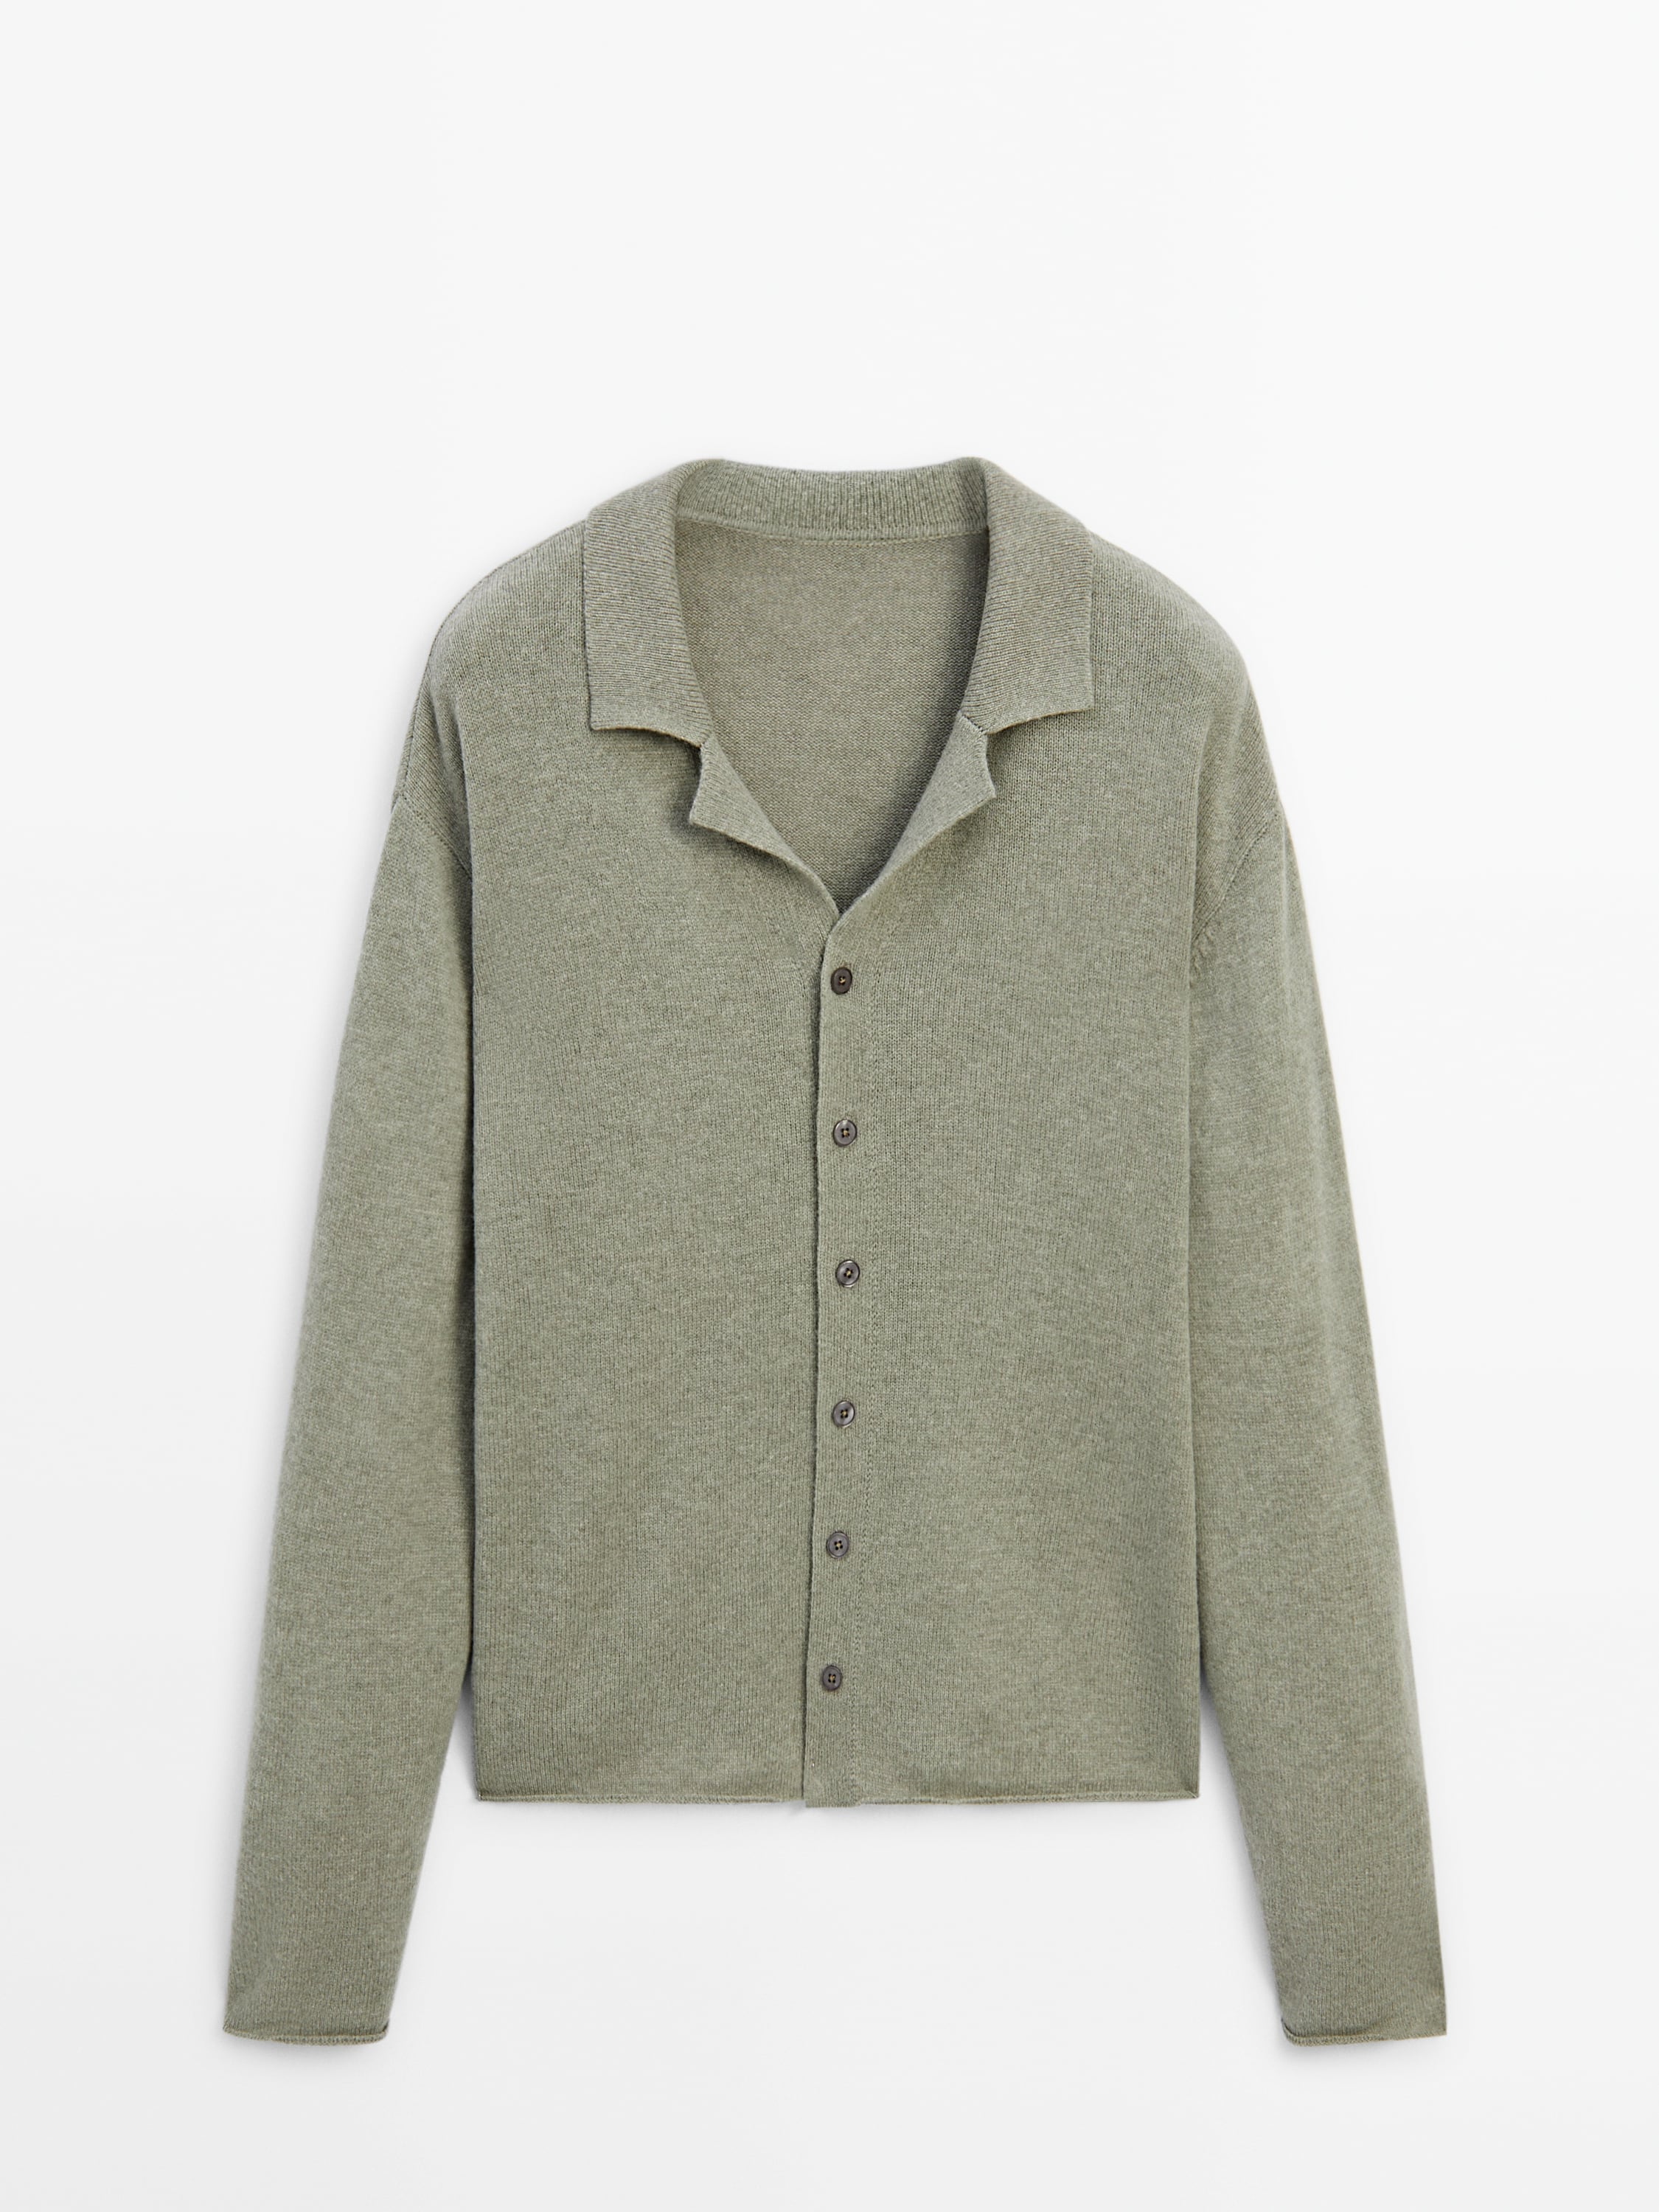 Cardigan with shirt collar and buttons